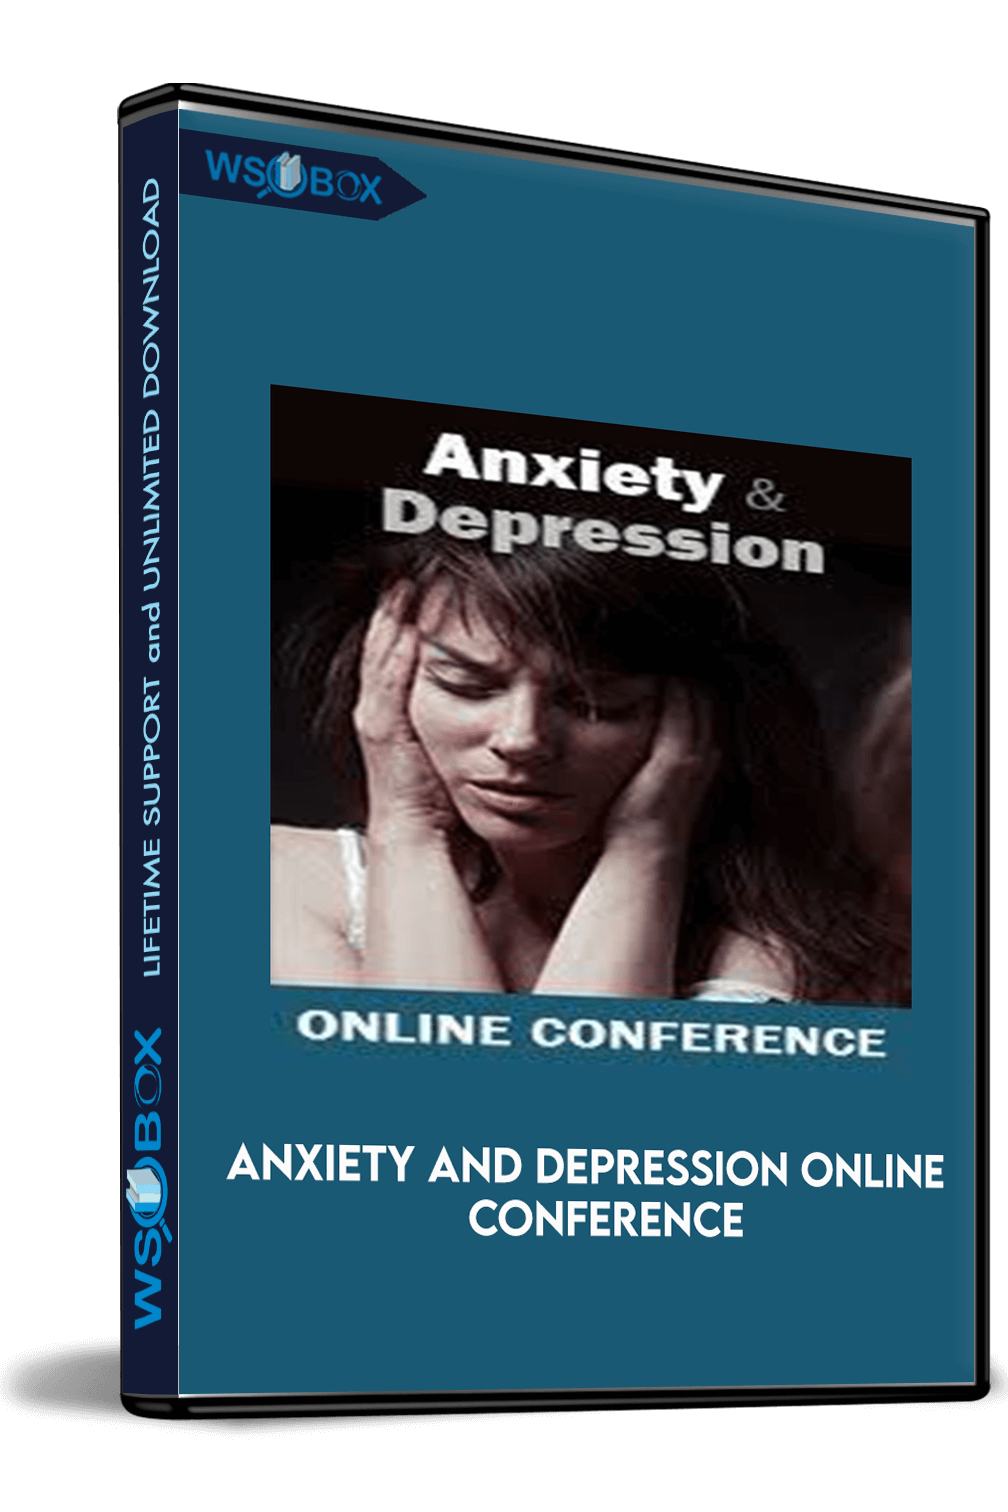 anxiety-and-depression-online-conference-evidence-based-treatments-for-powerful-change-jennifer-l-abel-judy-belmont-margaret-wehrenberg-mary-nurriestearns-reid-wilson